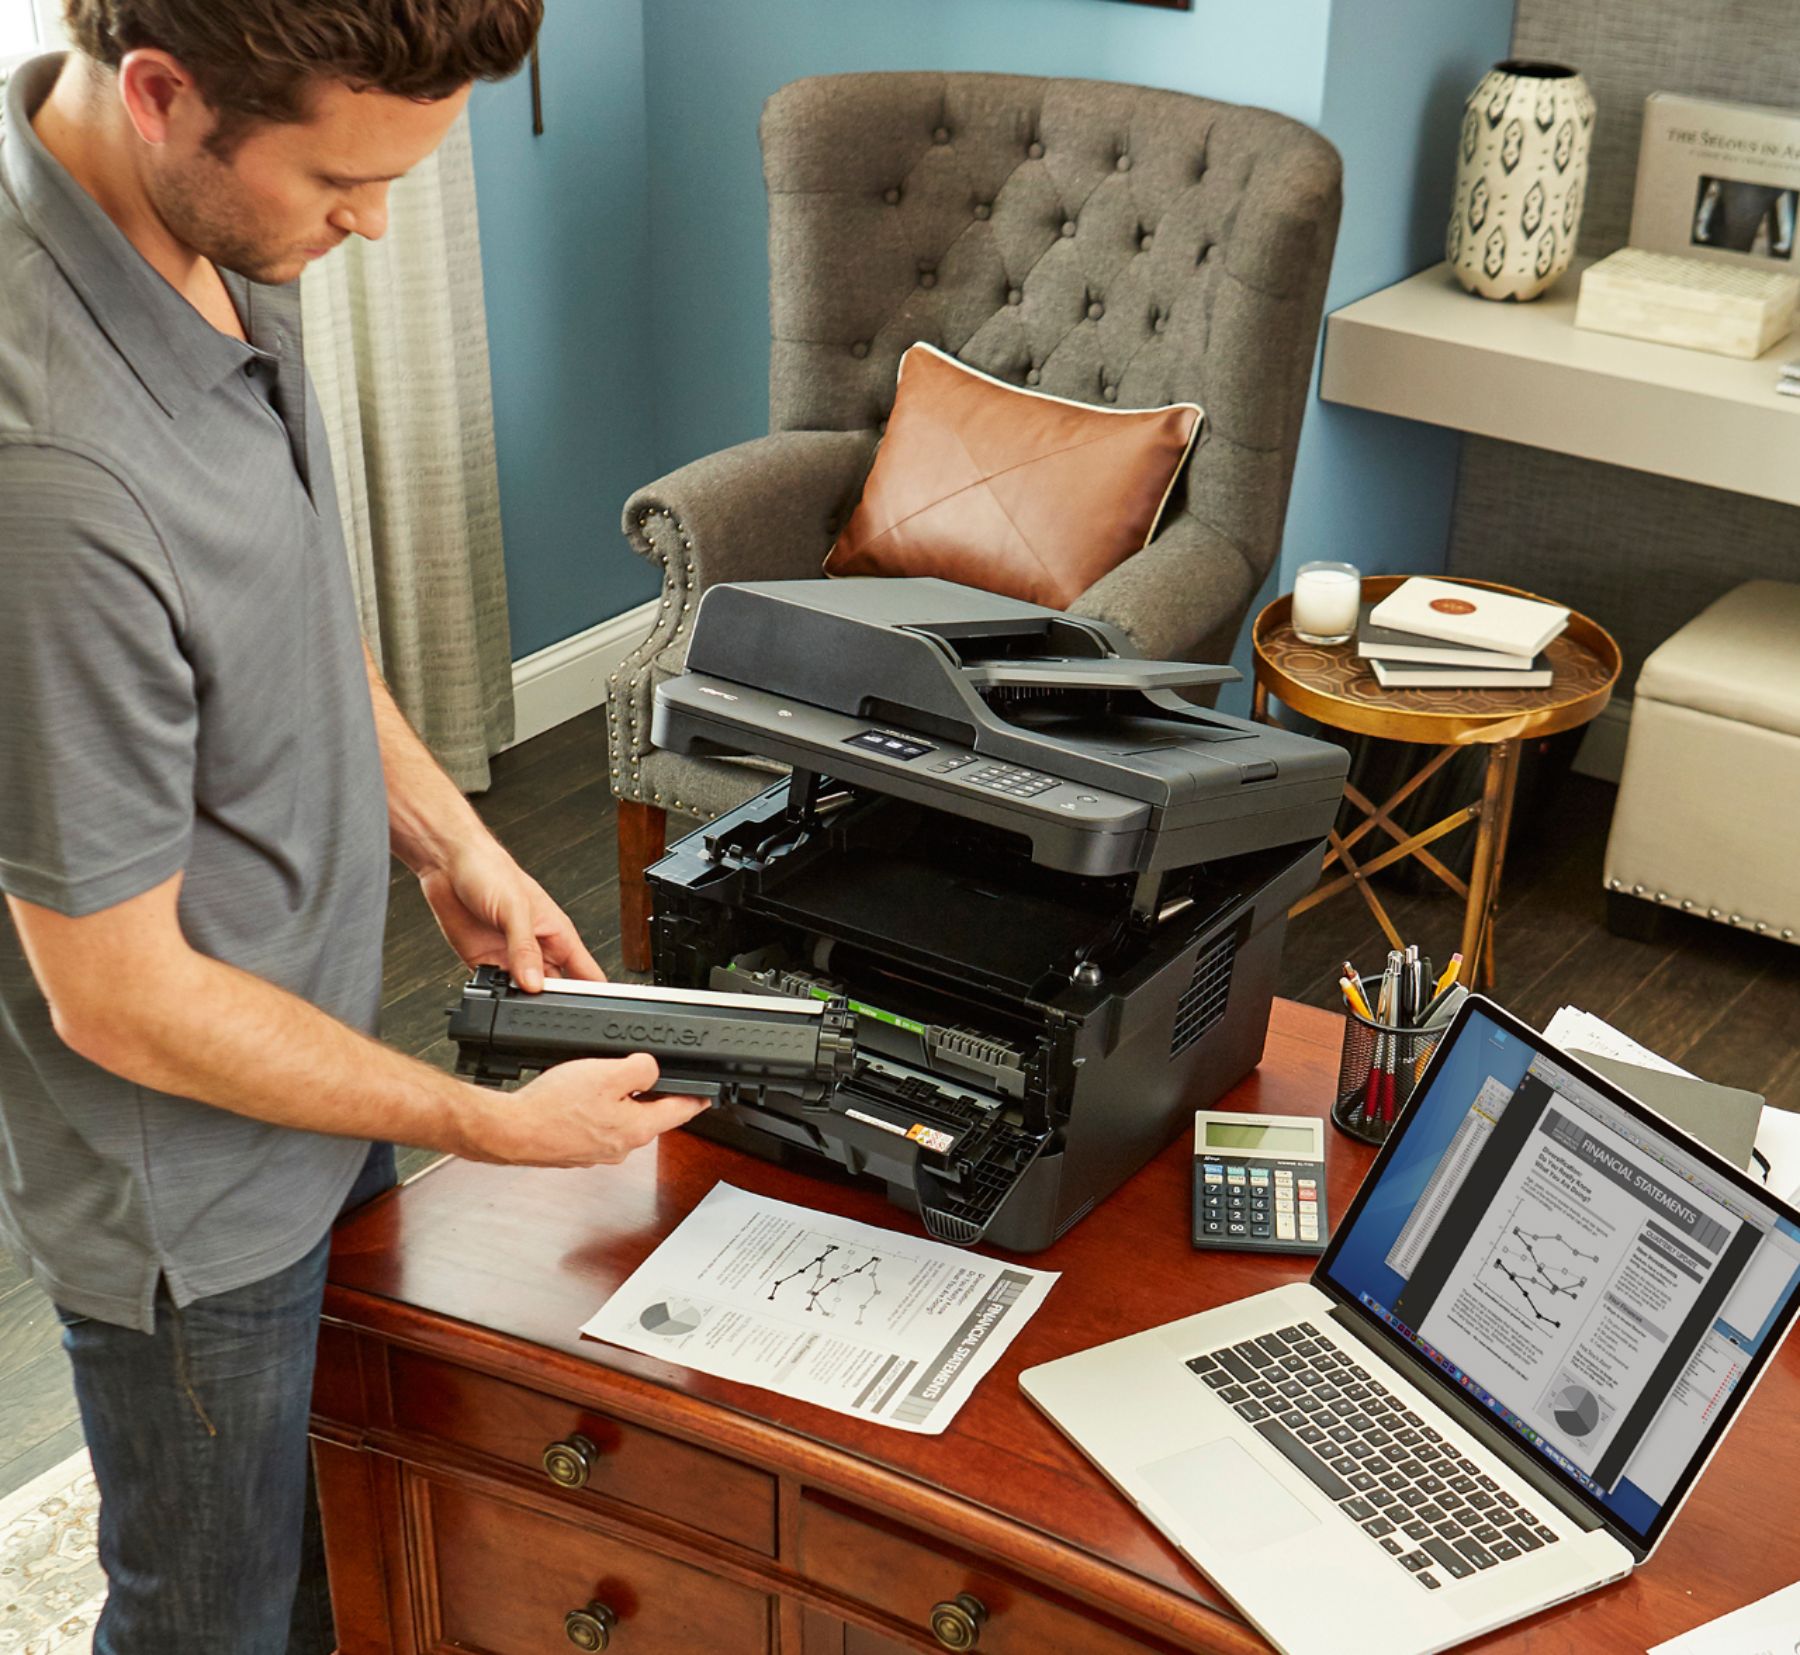 Dash Replenishment Enabled Brother MFCL2750DW Monochrome All-in-One Wireless Laser Printer Duplex Copy & Scan 